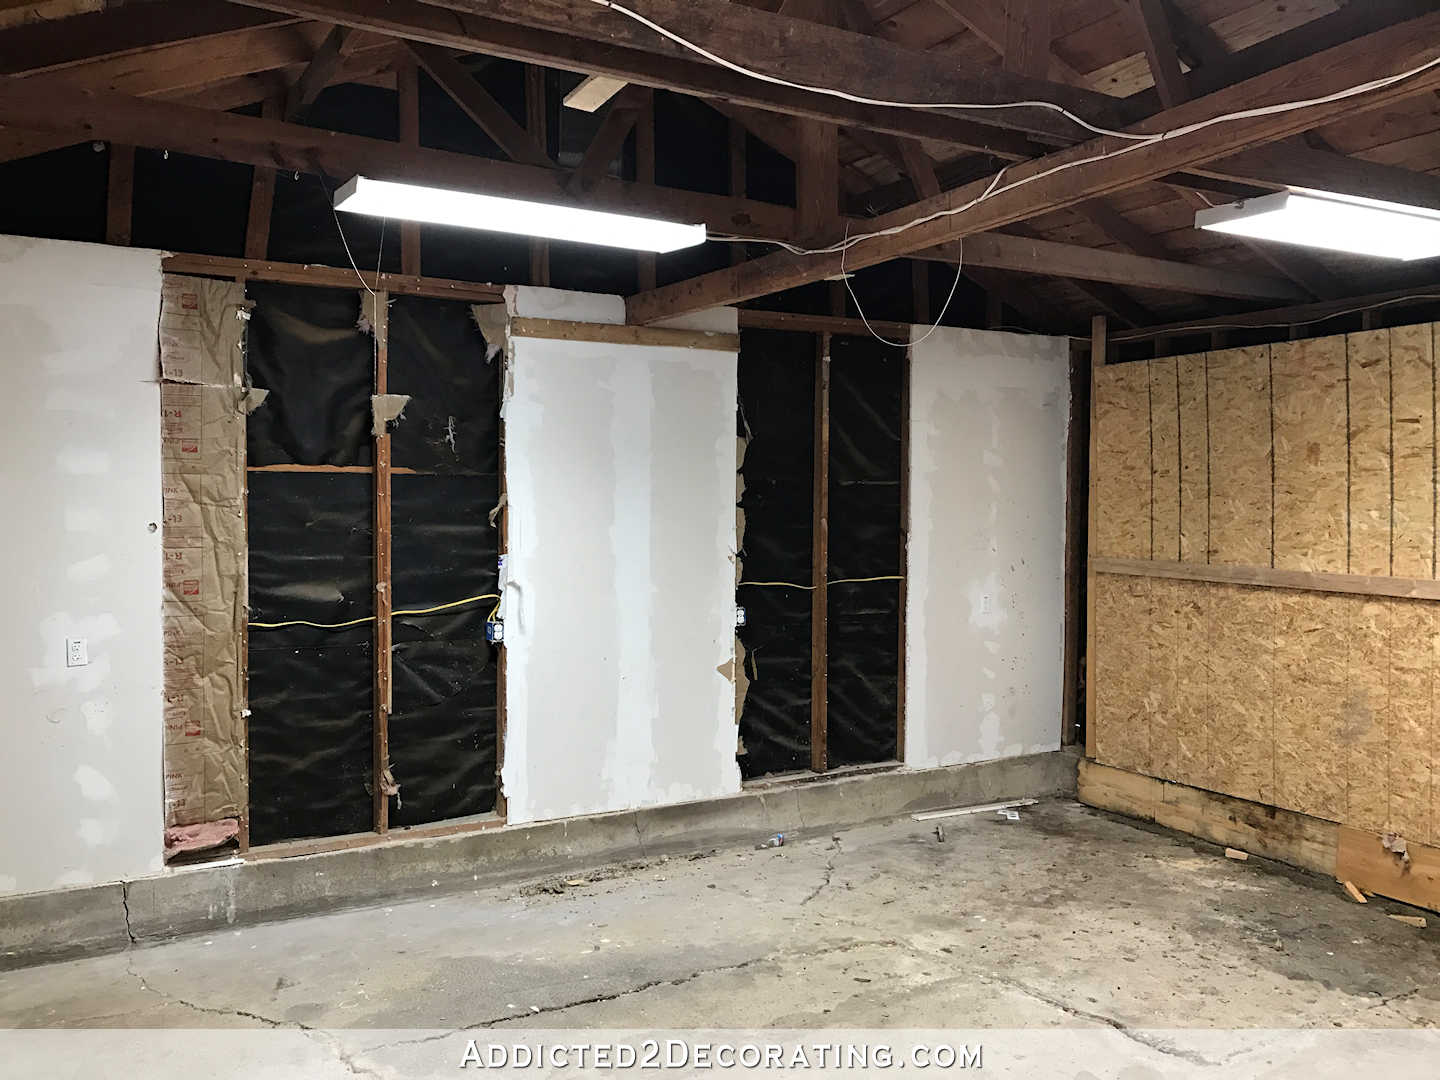 7-1-17 - garage and storage room cleared out - 2